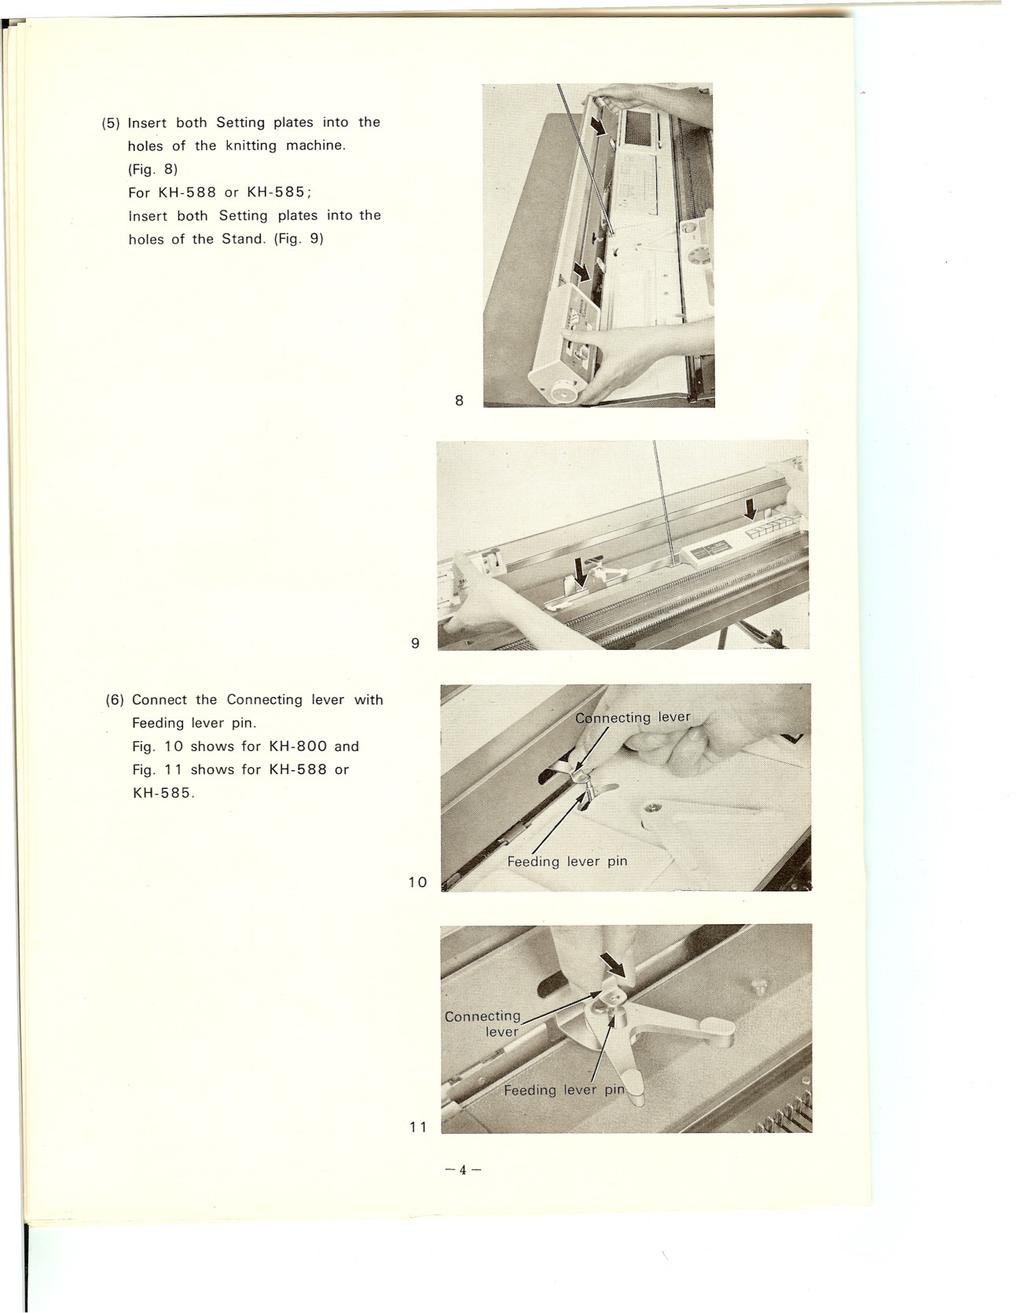 (5) Insert both Setting plates into the holes of the knitting machine. (Fig. 8) For KH-588 or KH-585; Insert both Setting plates into the holes of the Stand. (Fig. 9) 8 9 (6) Connect the Connecting lever with Feeding lever pin.